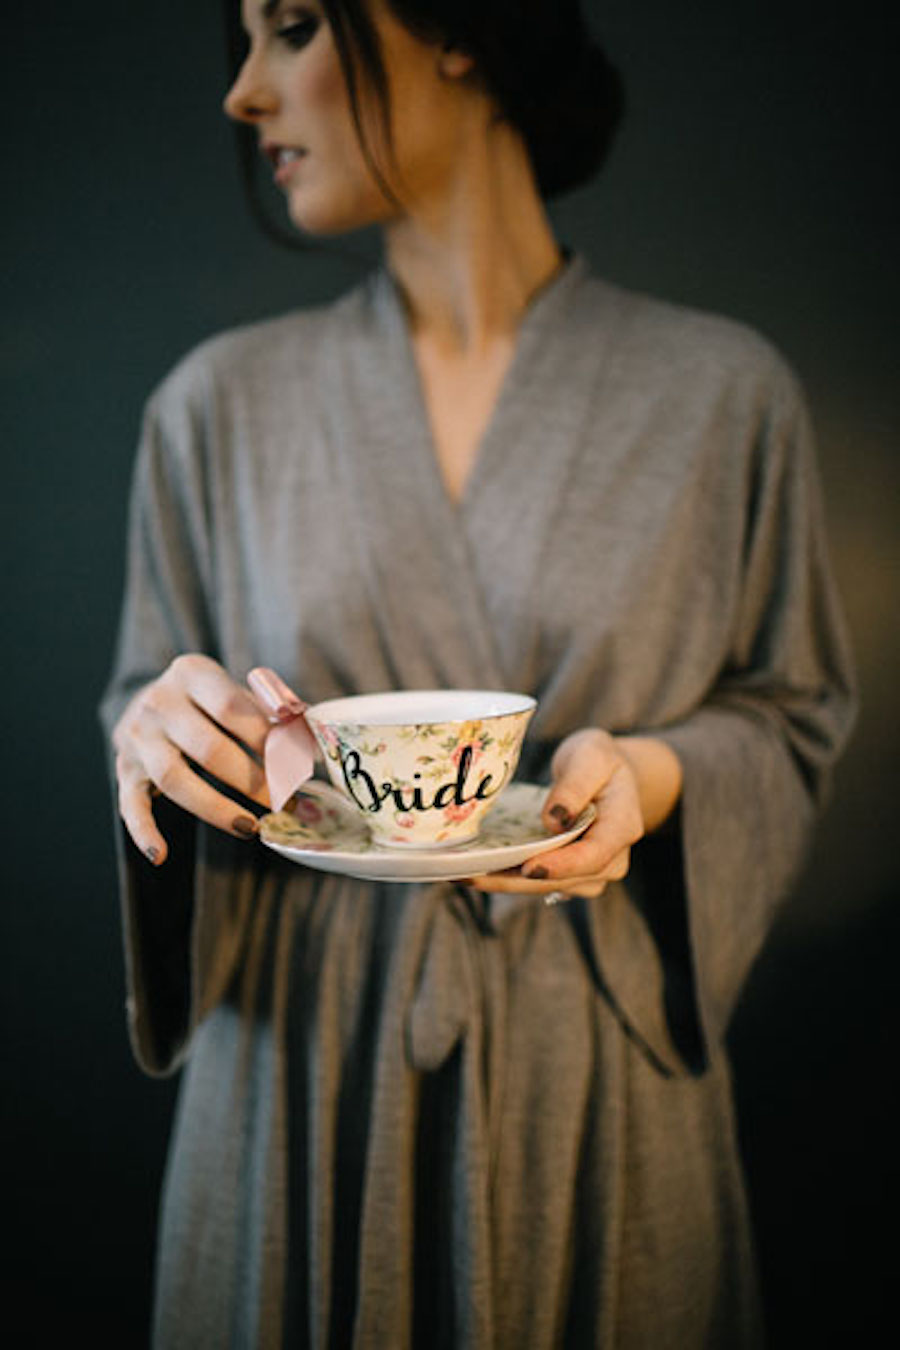 Getting Ready Details: Bridal Wedding Portrait in Robe Holding Bride Tea Cup